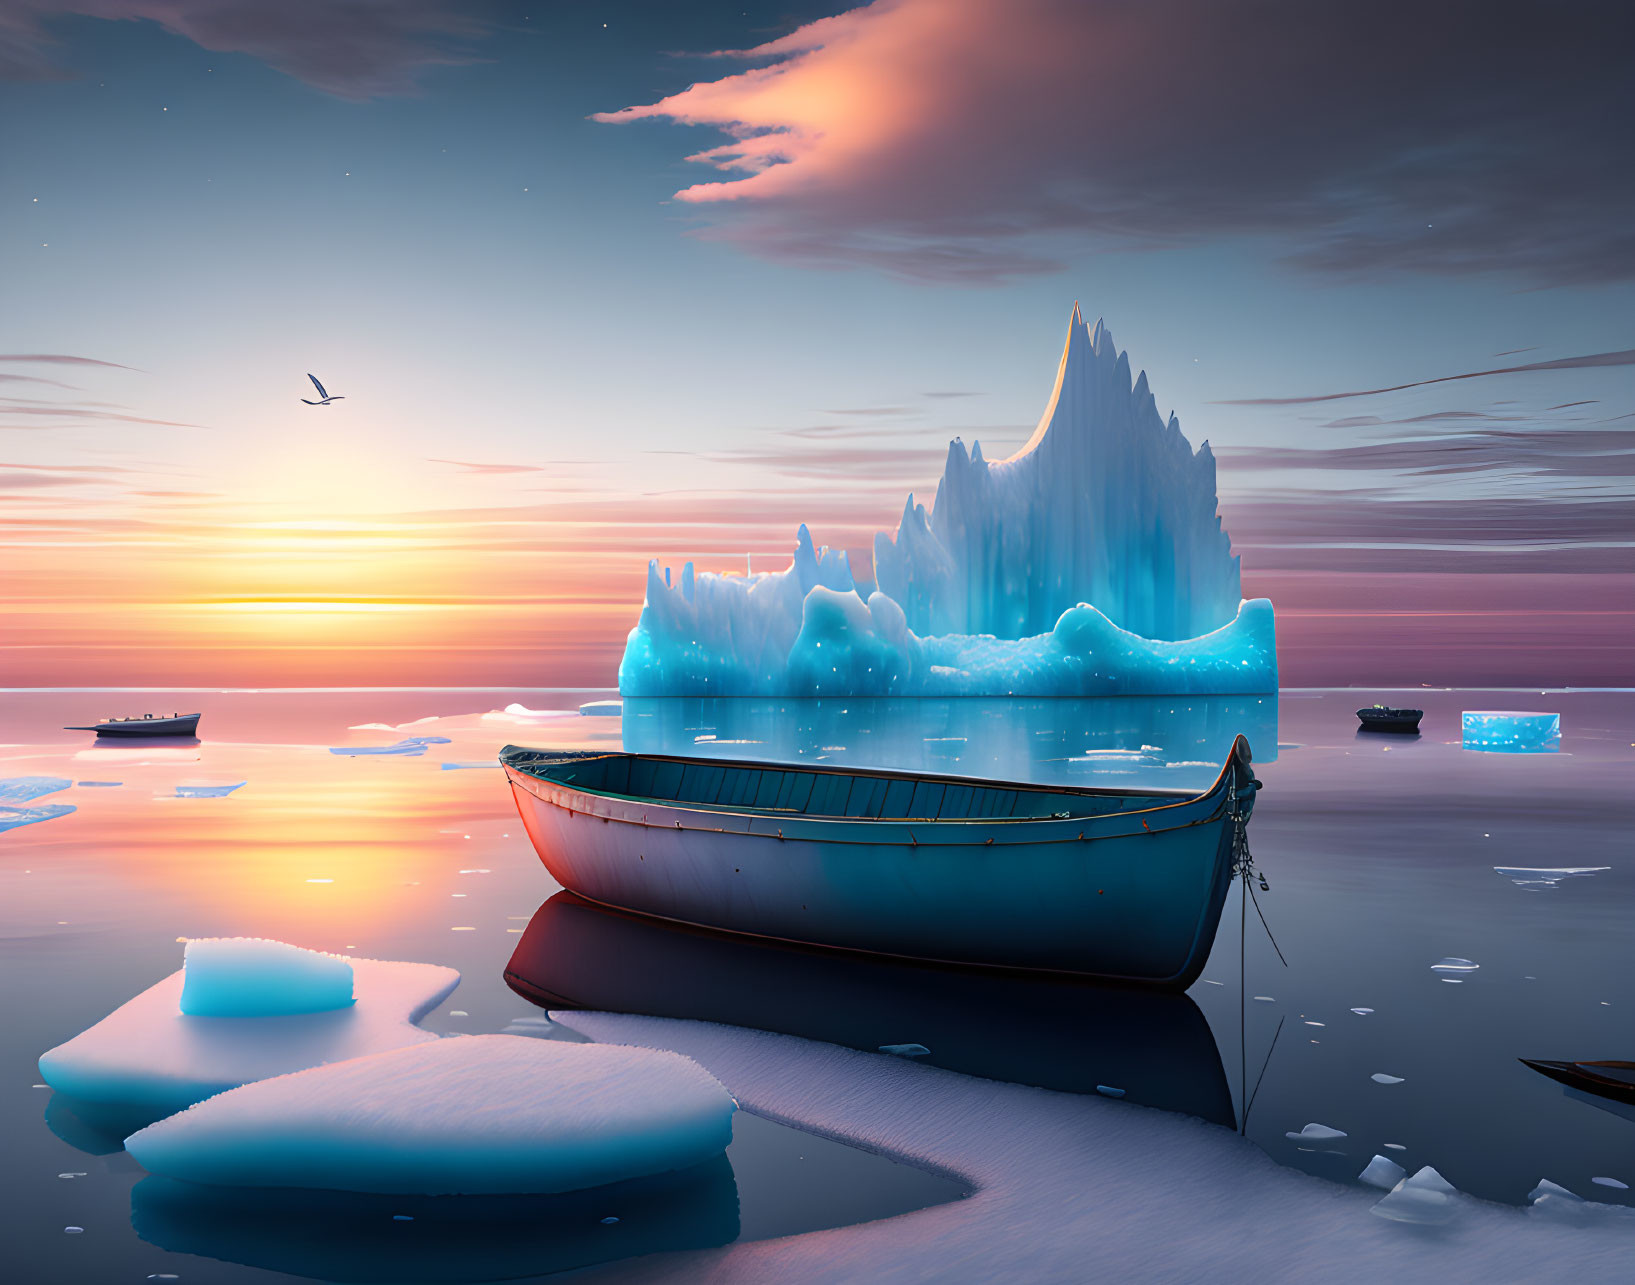 Tranquil dusk seascape with glacier, boat, and pastel sky